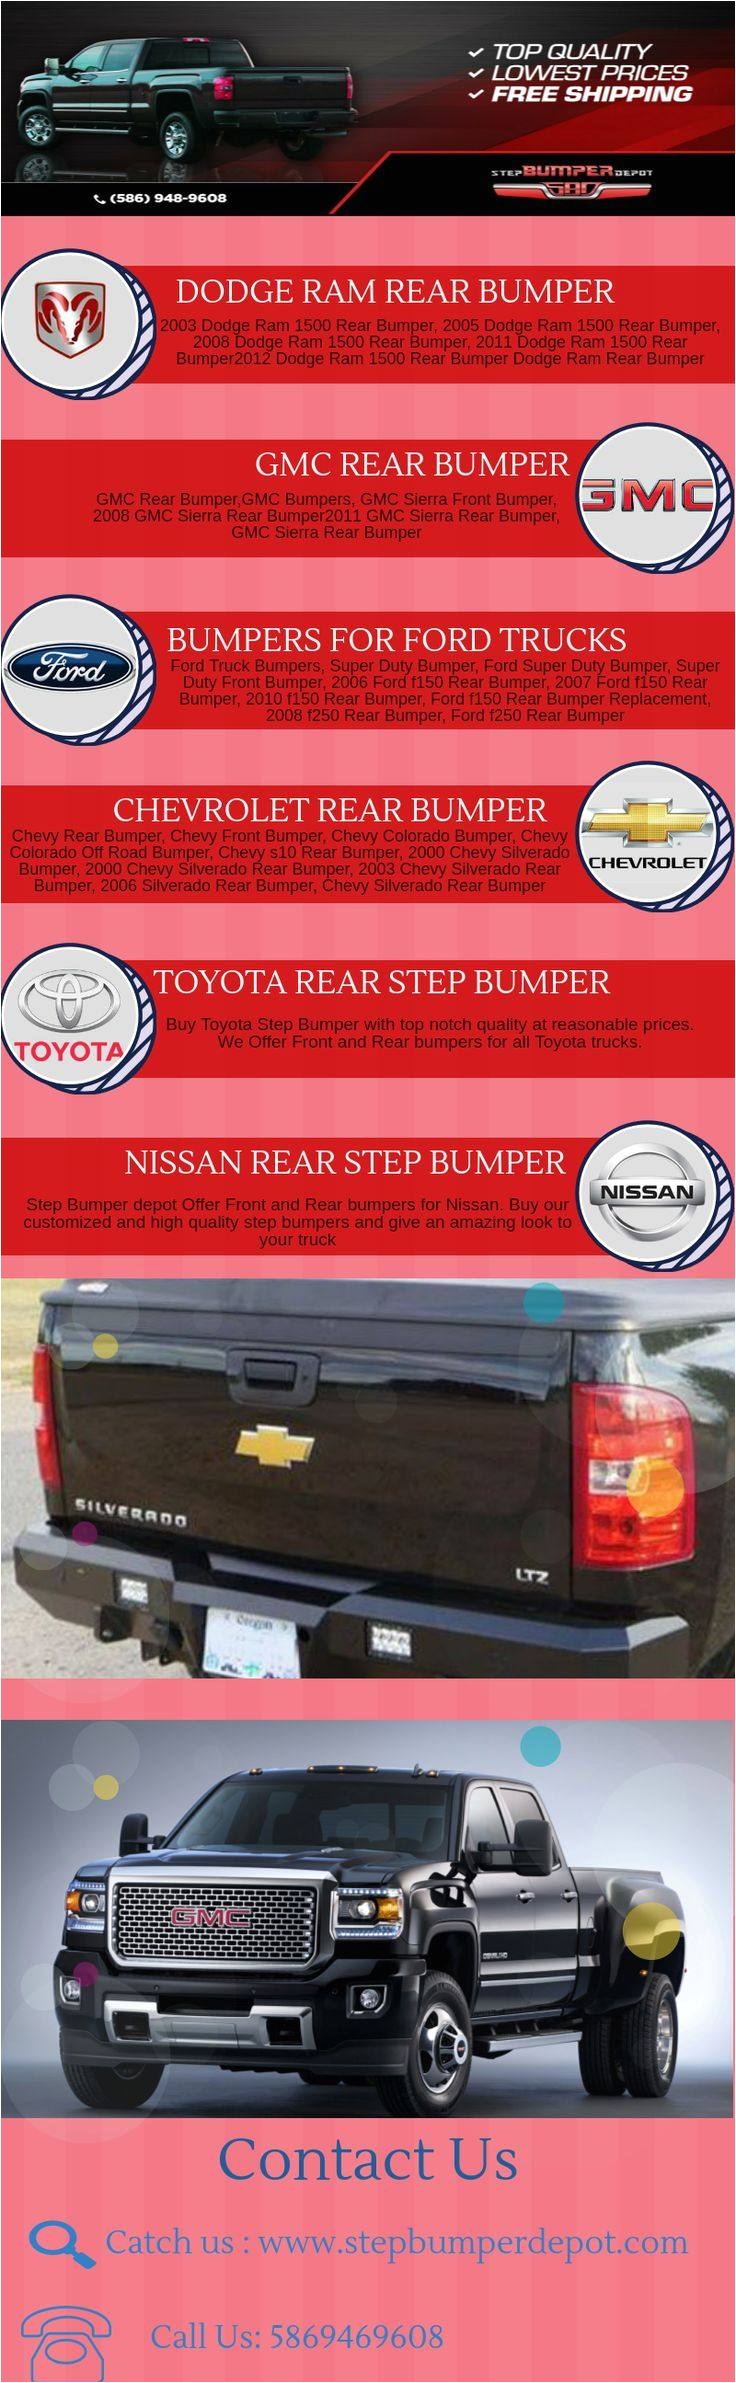 the 24 best gmc sierra bumpers images on pinterest types of 2006 chevy silverado tail lights